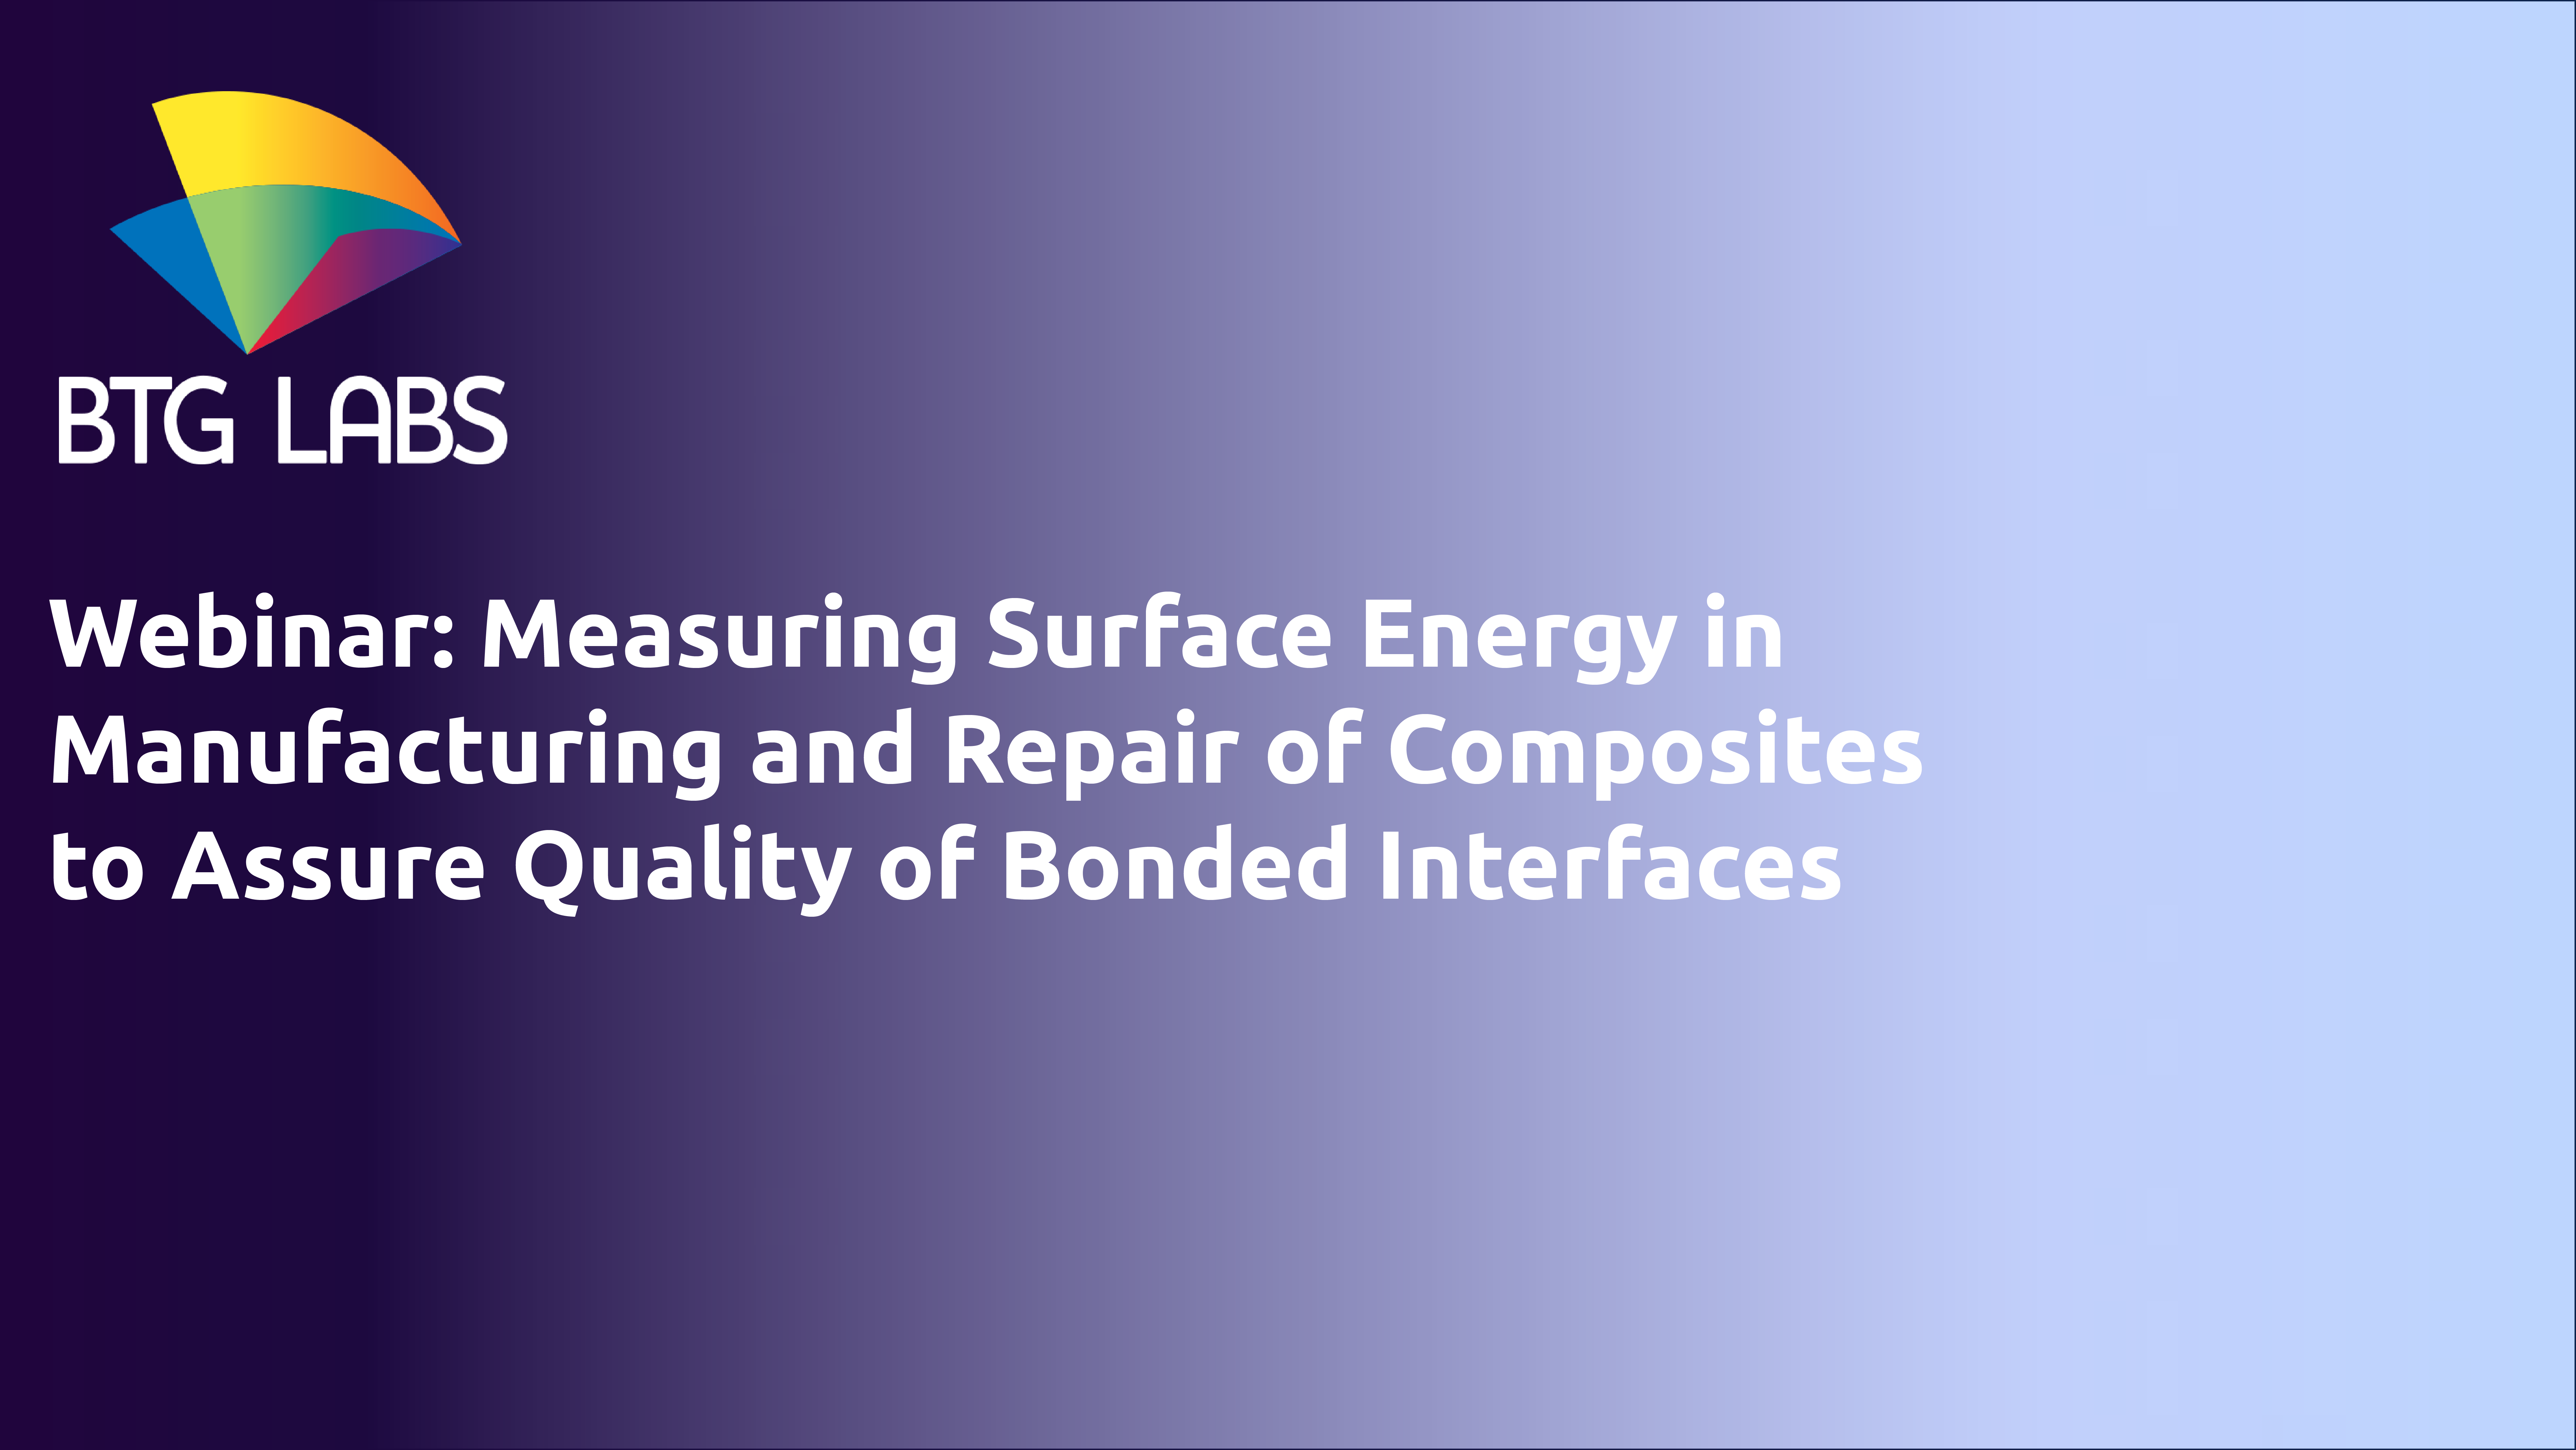 Webinar: The Importance of Adhesive Bonds in Composite Manufacturing and Repairs